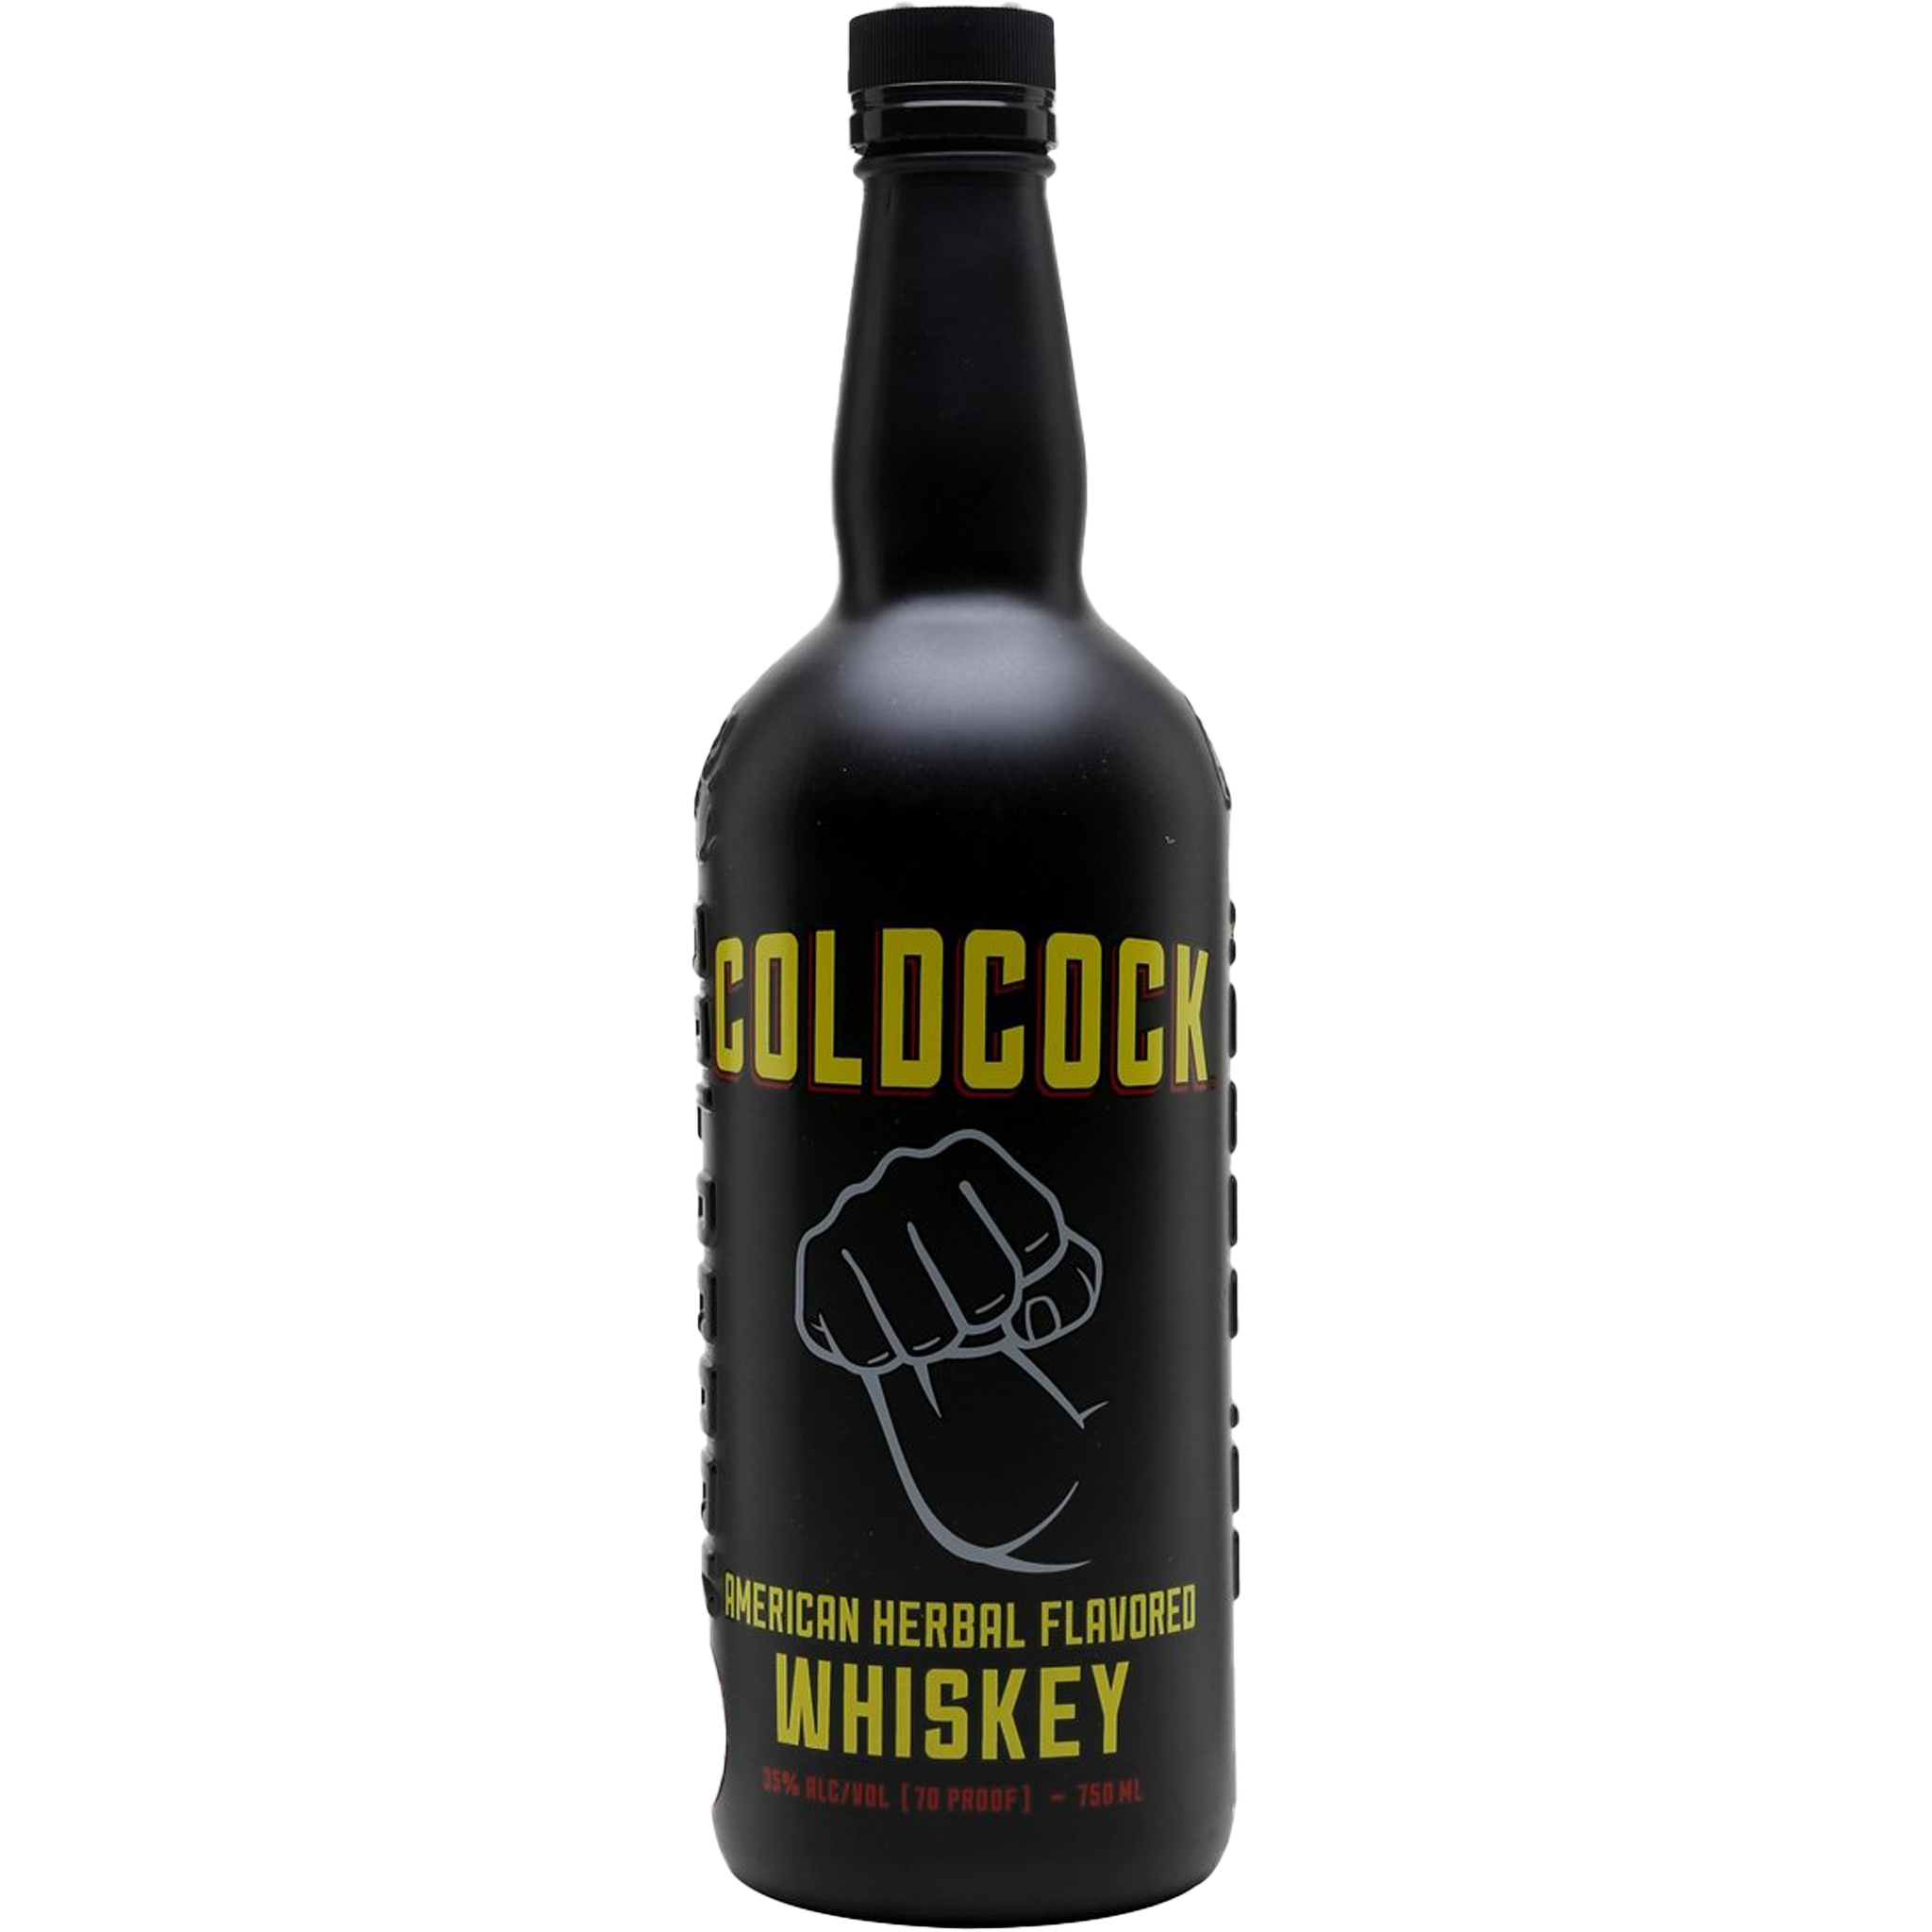 Coldcock Herbal Flavored Whiskey